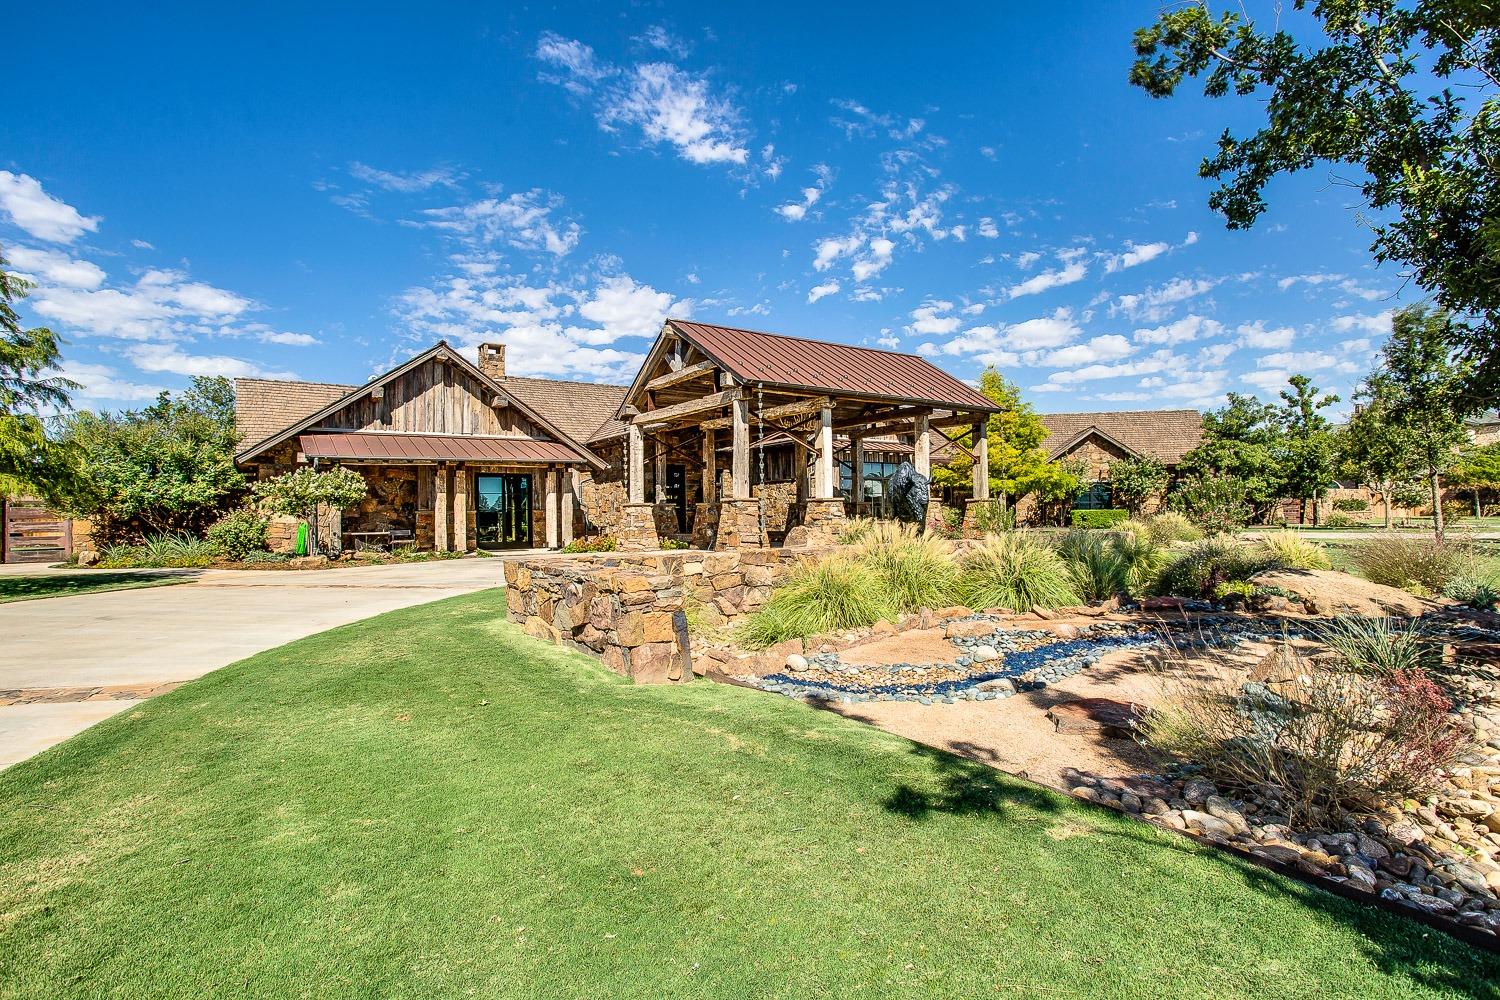 Step into your own rustic dream home, where the beauty of nature meets the epitome of luxury. This stunning 4-bedroom, 4-1/2 bathroom fully automated home with a POOL/POOL HOUSE is located in South Fork Ranch! The heart of the home is the gourmet kitchen, featuring a built-in fridge/freezer, double oven Italian range, ice maker, wine fridge, and a large pantry. The primary bedroom offers a spacious and tranquil escape with two large walk-in closets, and an en-suite bathroom with a steam shower and separate vanity spaces. Outside, the luxury continues with two spacious patios, outdoor kitchen, heated pool, and koi pond. The pool house is a retreat of its own, complete with a kitchen, bathroom, and a spacious living area, perfect for hosting gatherings. The main house and pool house each have their own 4 car garage/shop that is air conditioned. Your dream home awaits. Don't miss out on the opportunity to make this house your home, call to schedule your showing today!